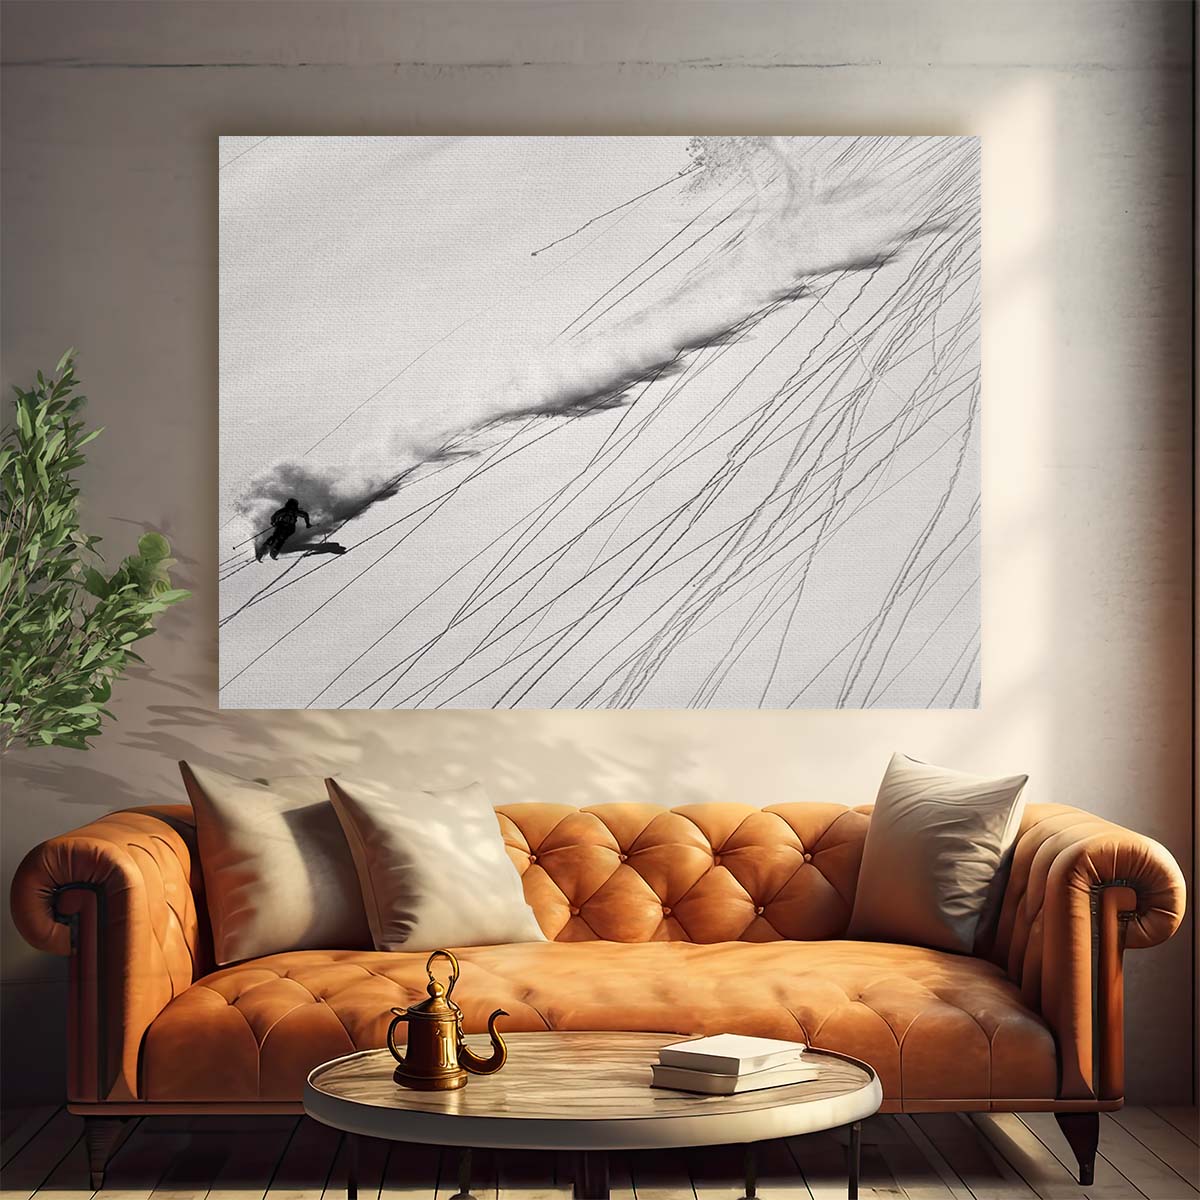 Alpine Freeride Skiing Adventure BW Wall Art by Luxuriance Designs. Made in USA.